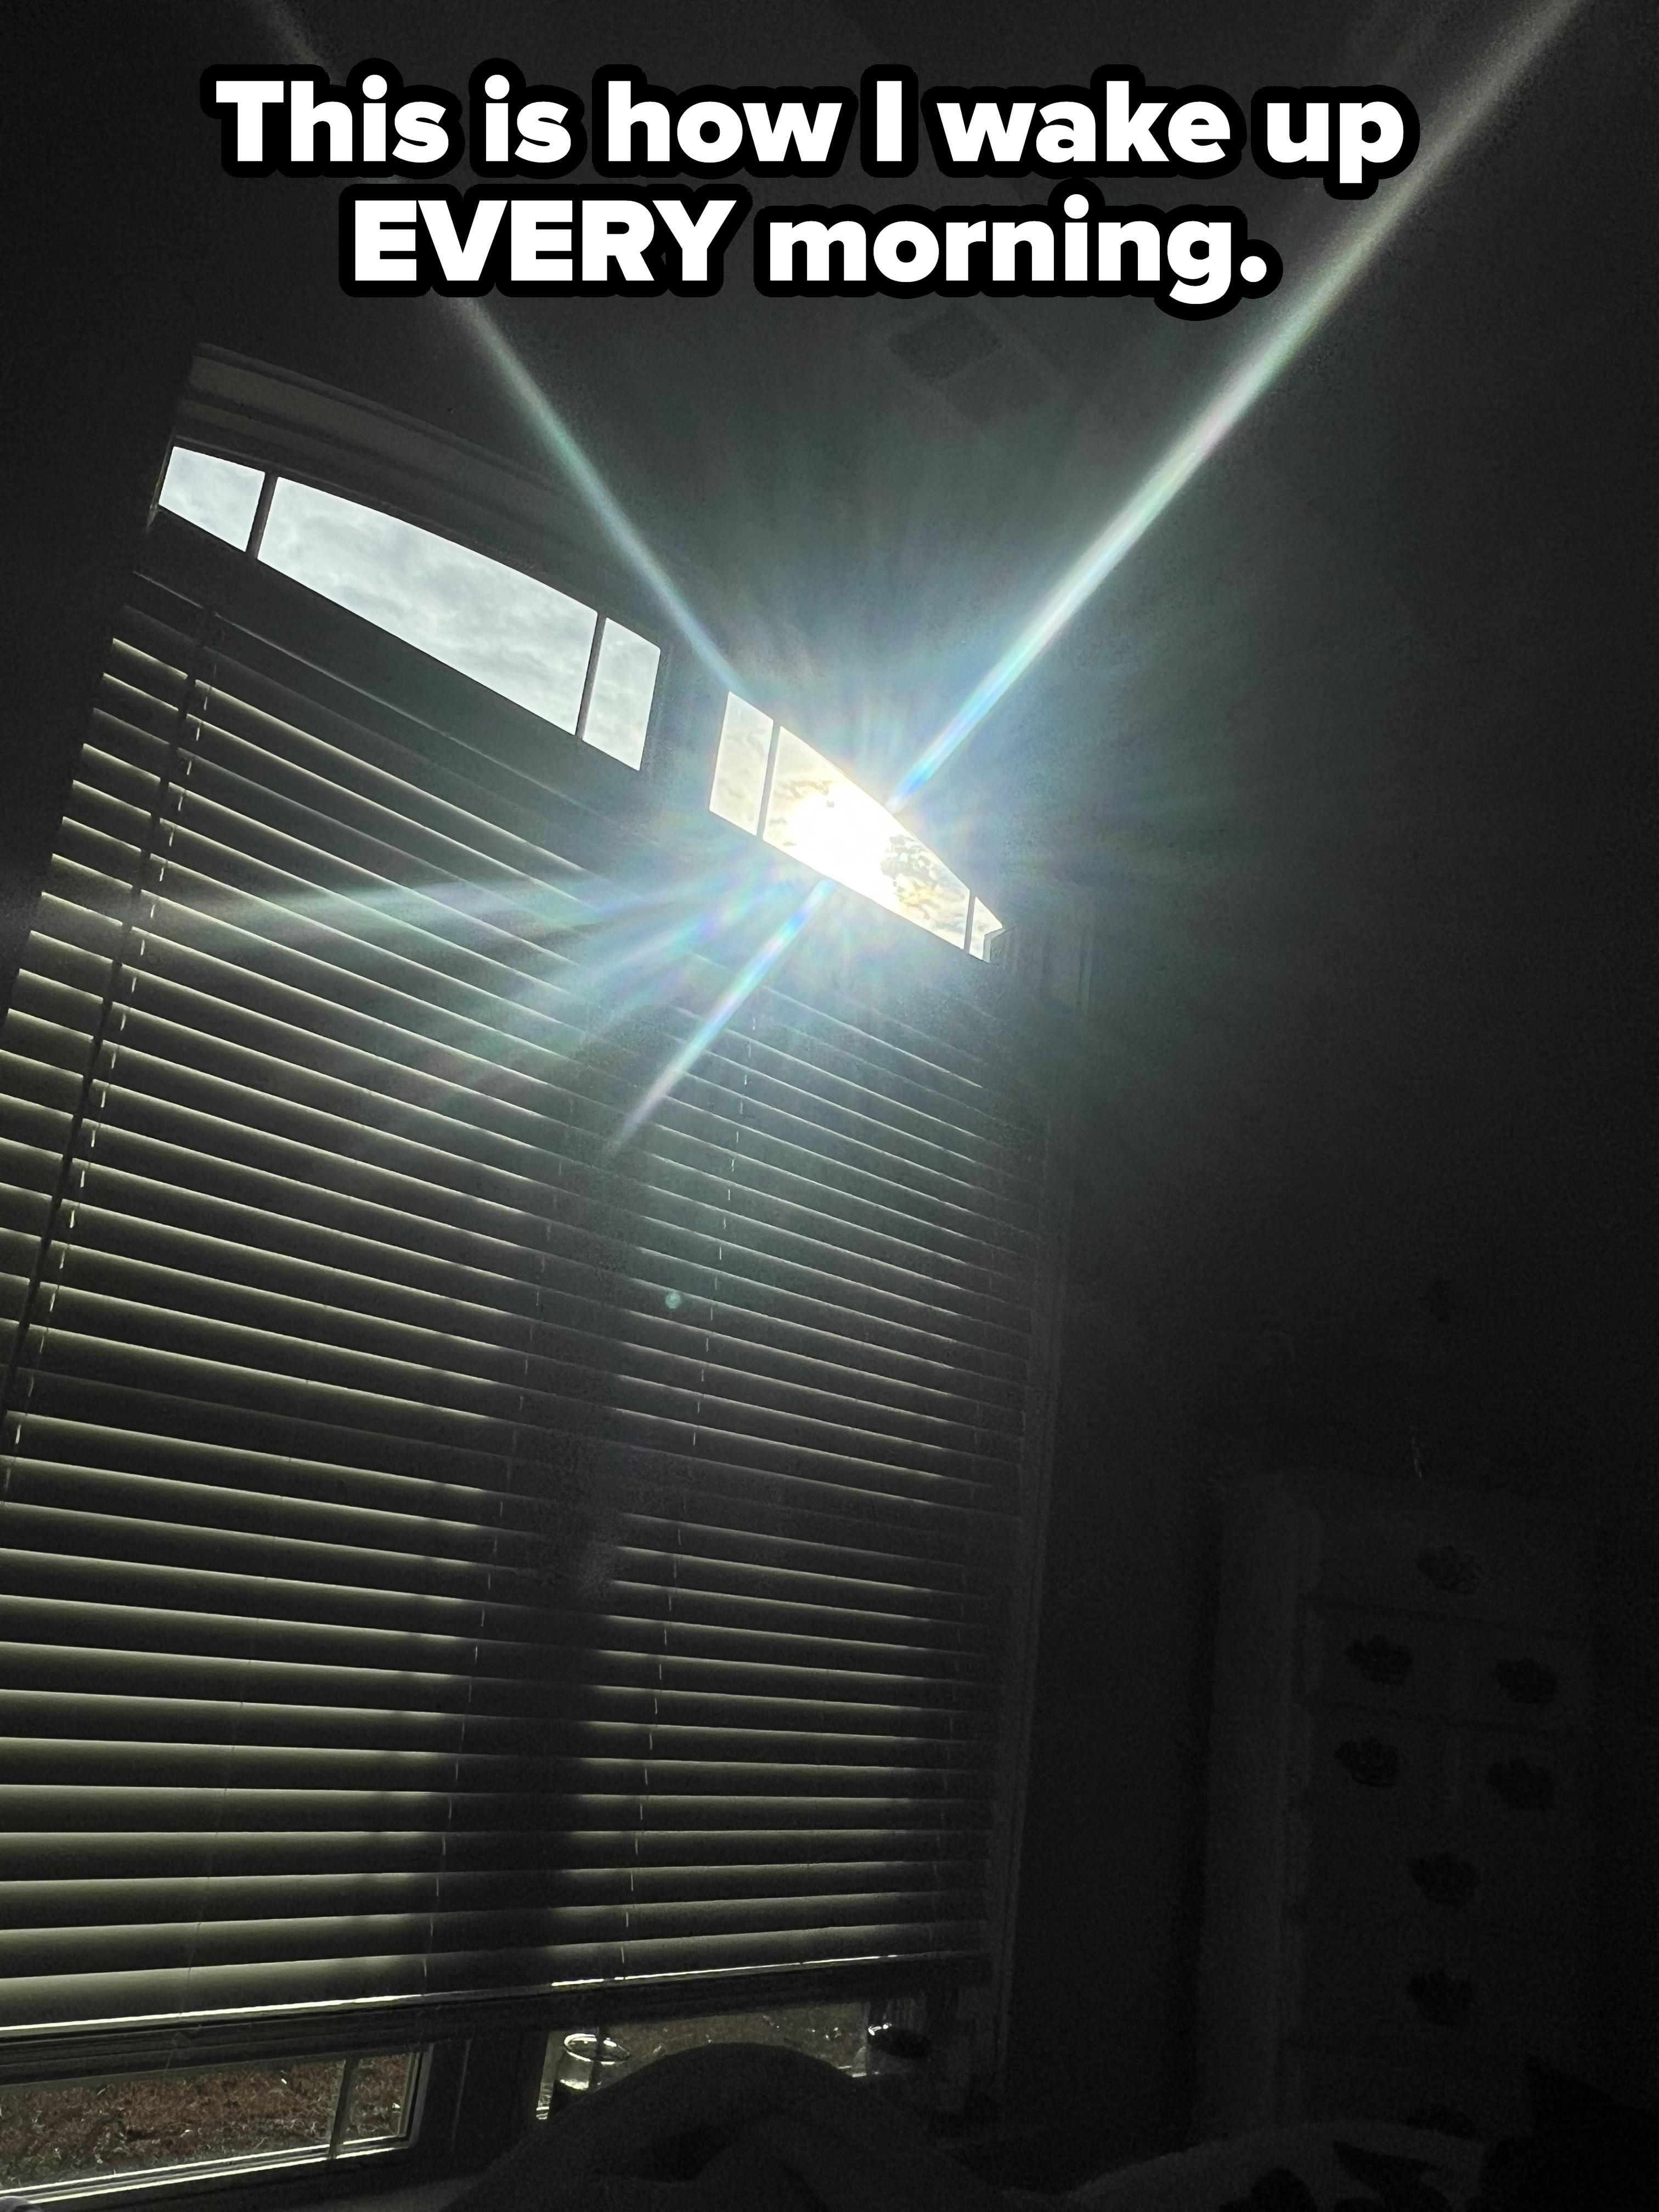 &quot;This is how I wake up EVERY morning&quot;: with sunlight streaming through the top of the window where the blinds don&#x27;t extend